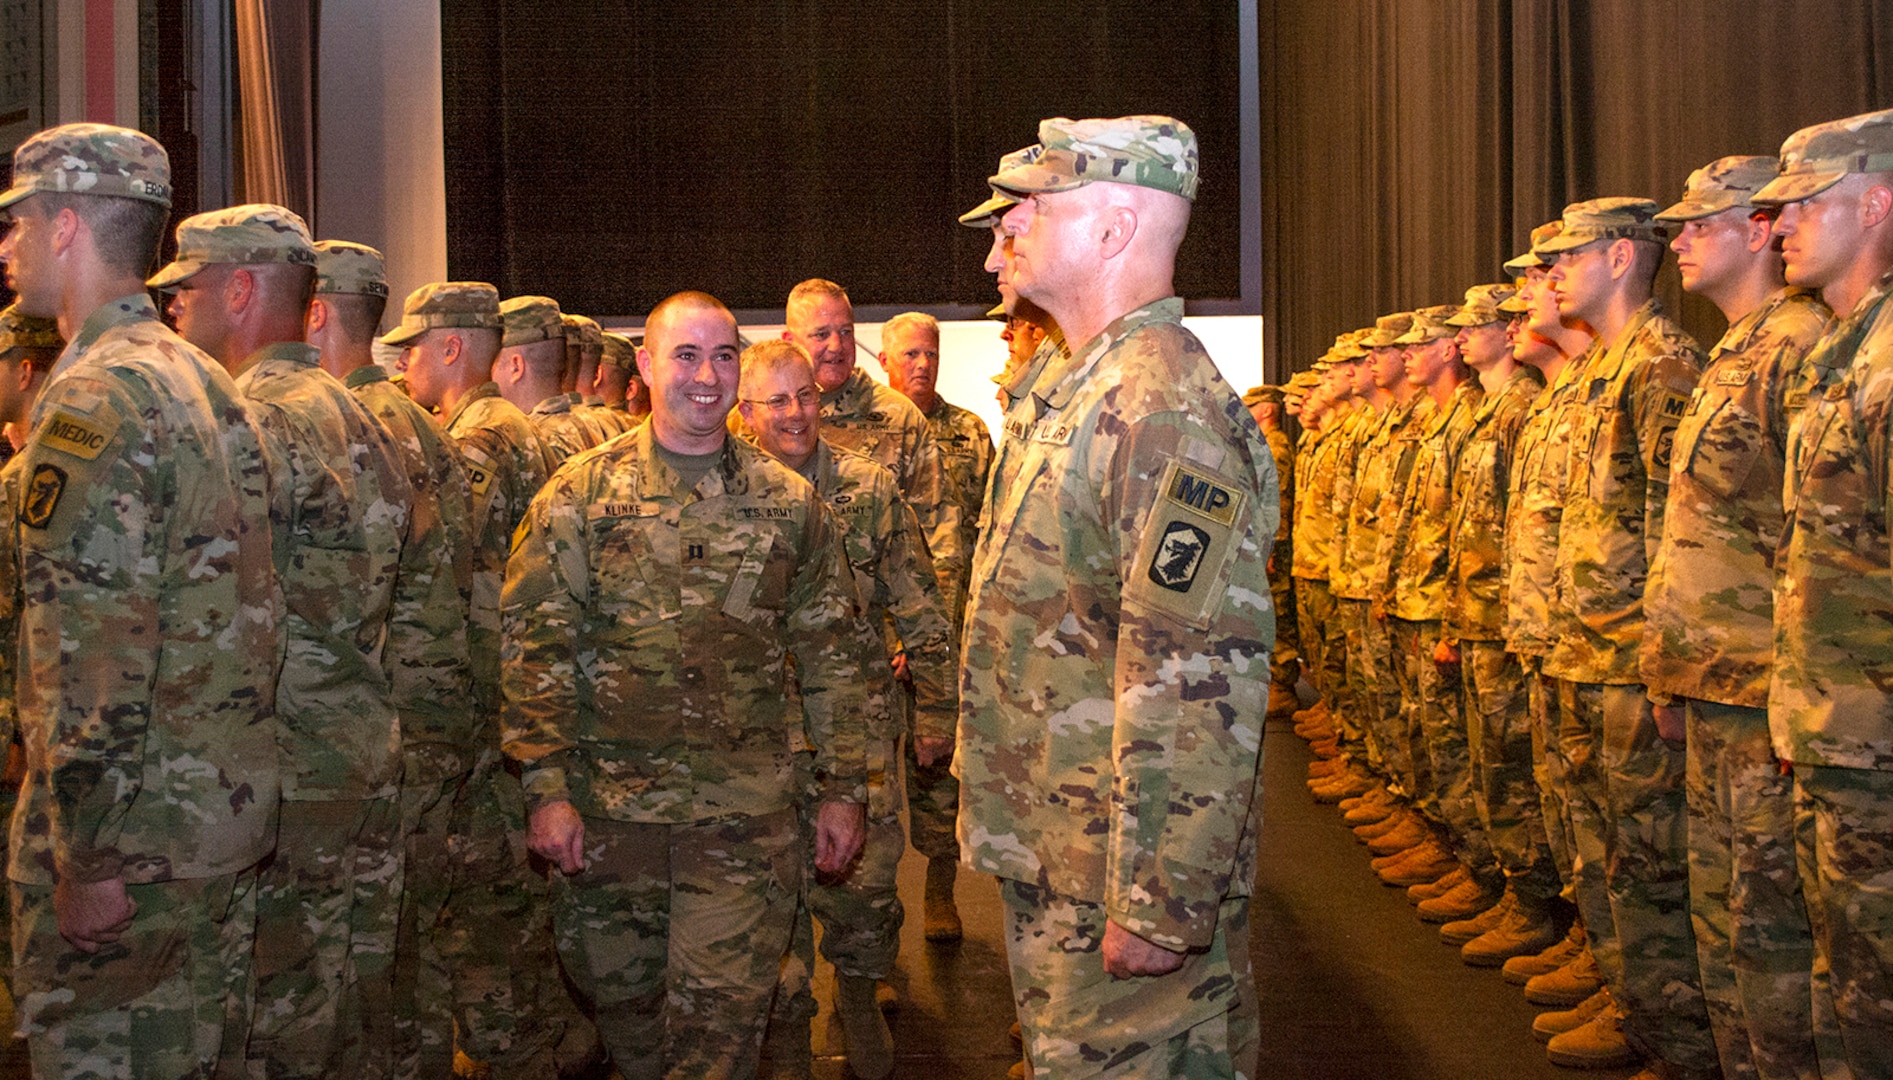 333rd inspecting the troops